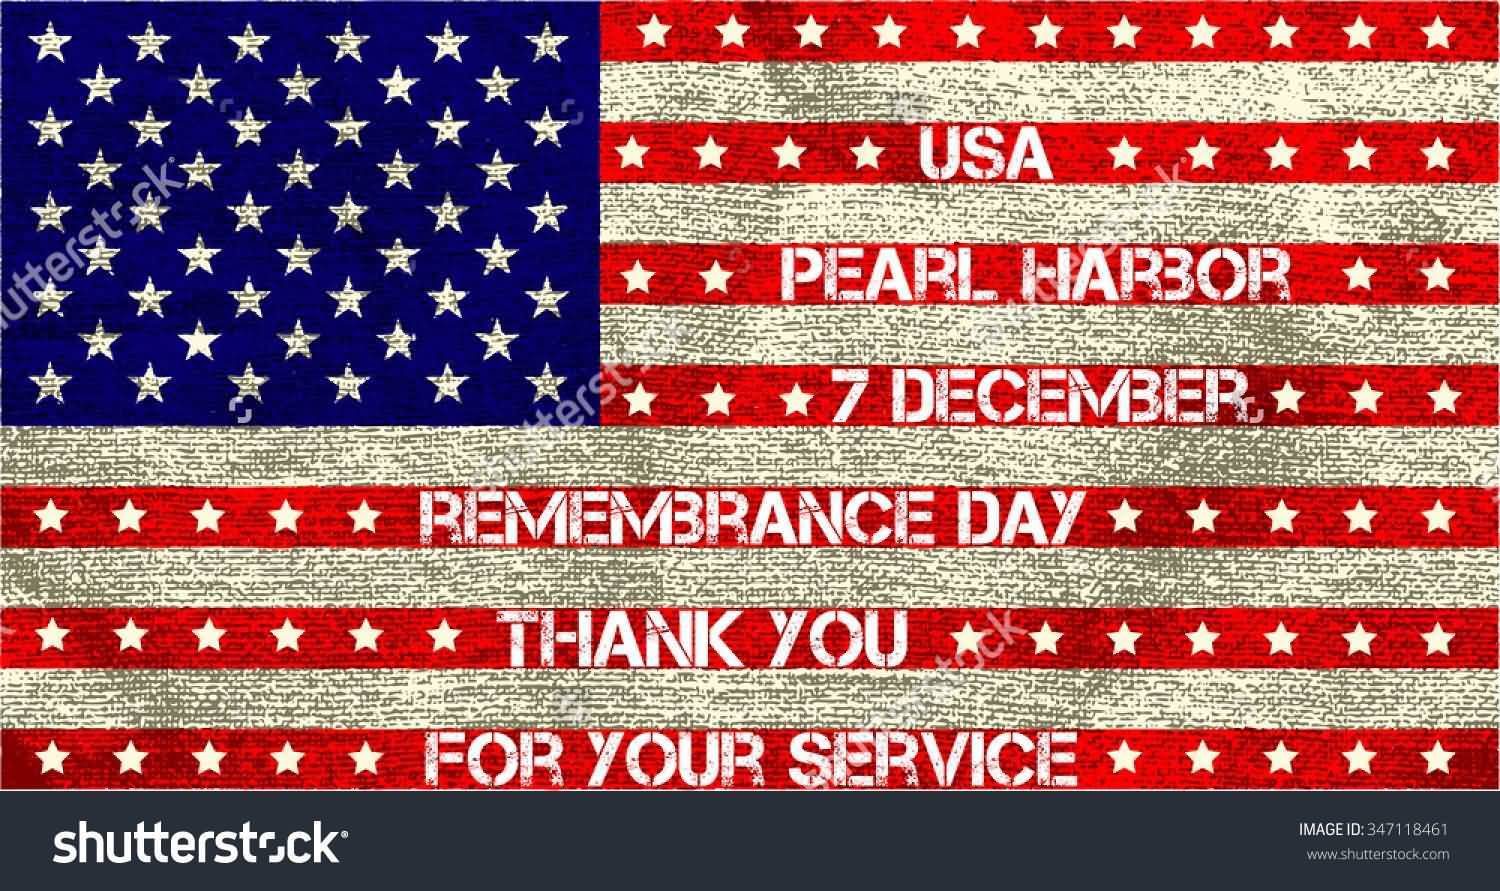 USA Pearl Harbor 7 December Remembrance Day Thank You For Your Service